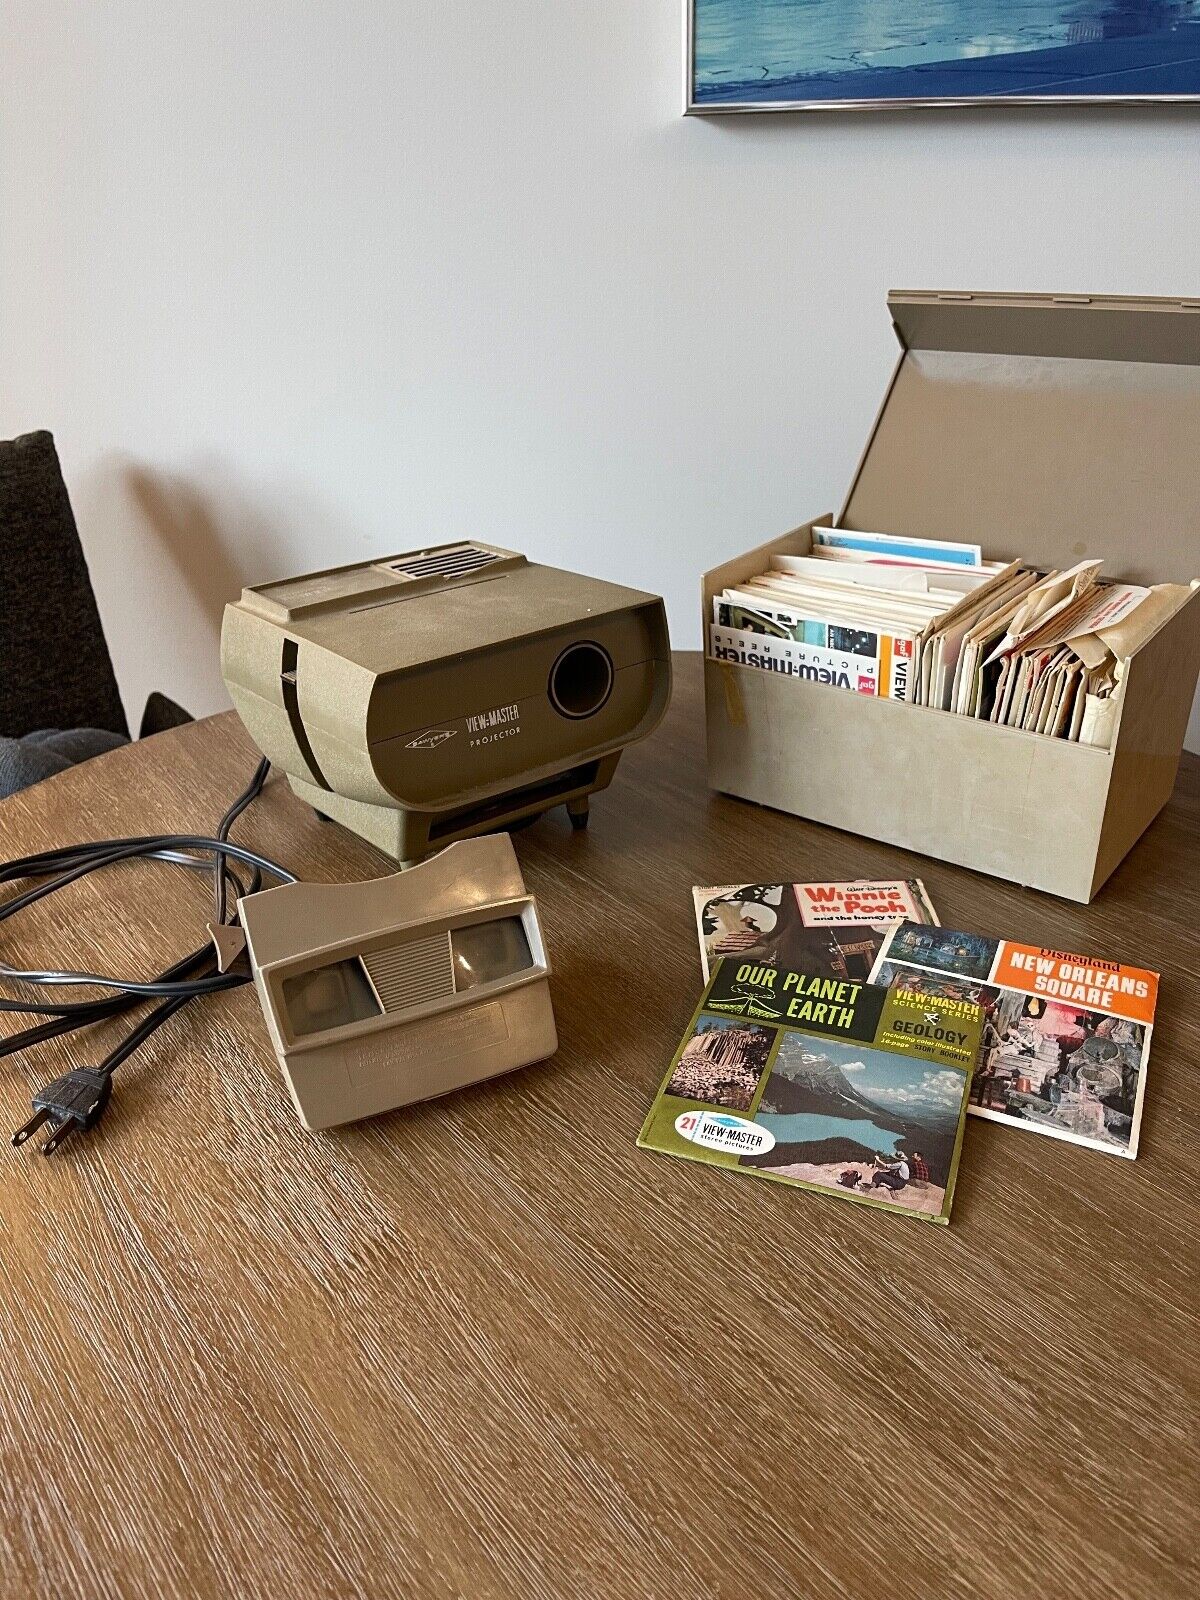 Vintage GAF Viewmaster Projector & Viewer Tyco With Stereo Photographs